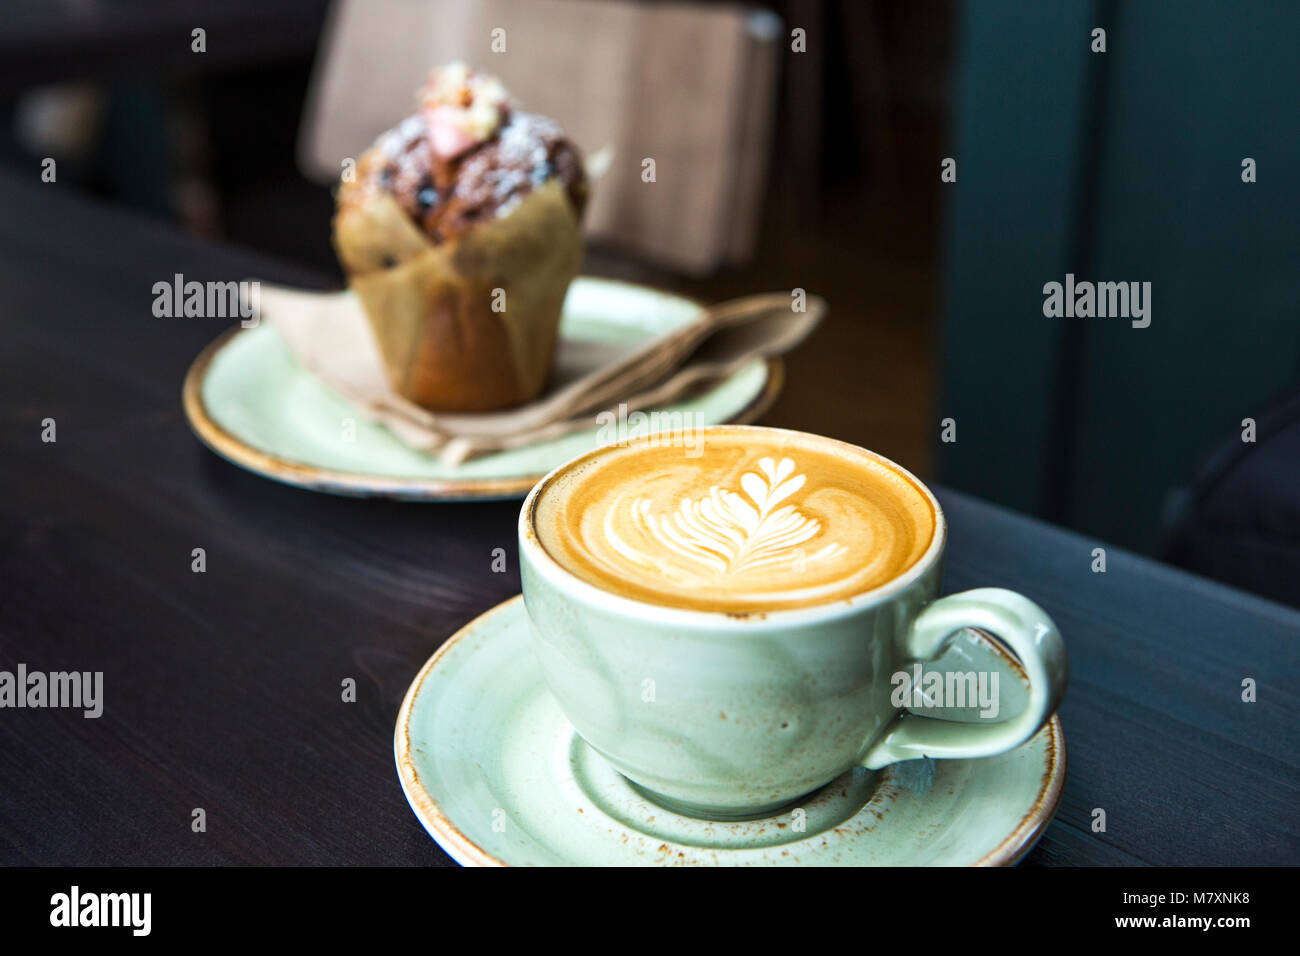 Cappuccino in green coffee cup and saucer with muffin. Stock Photo